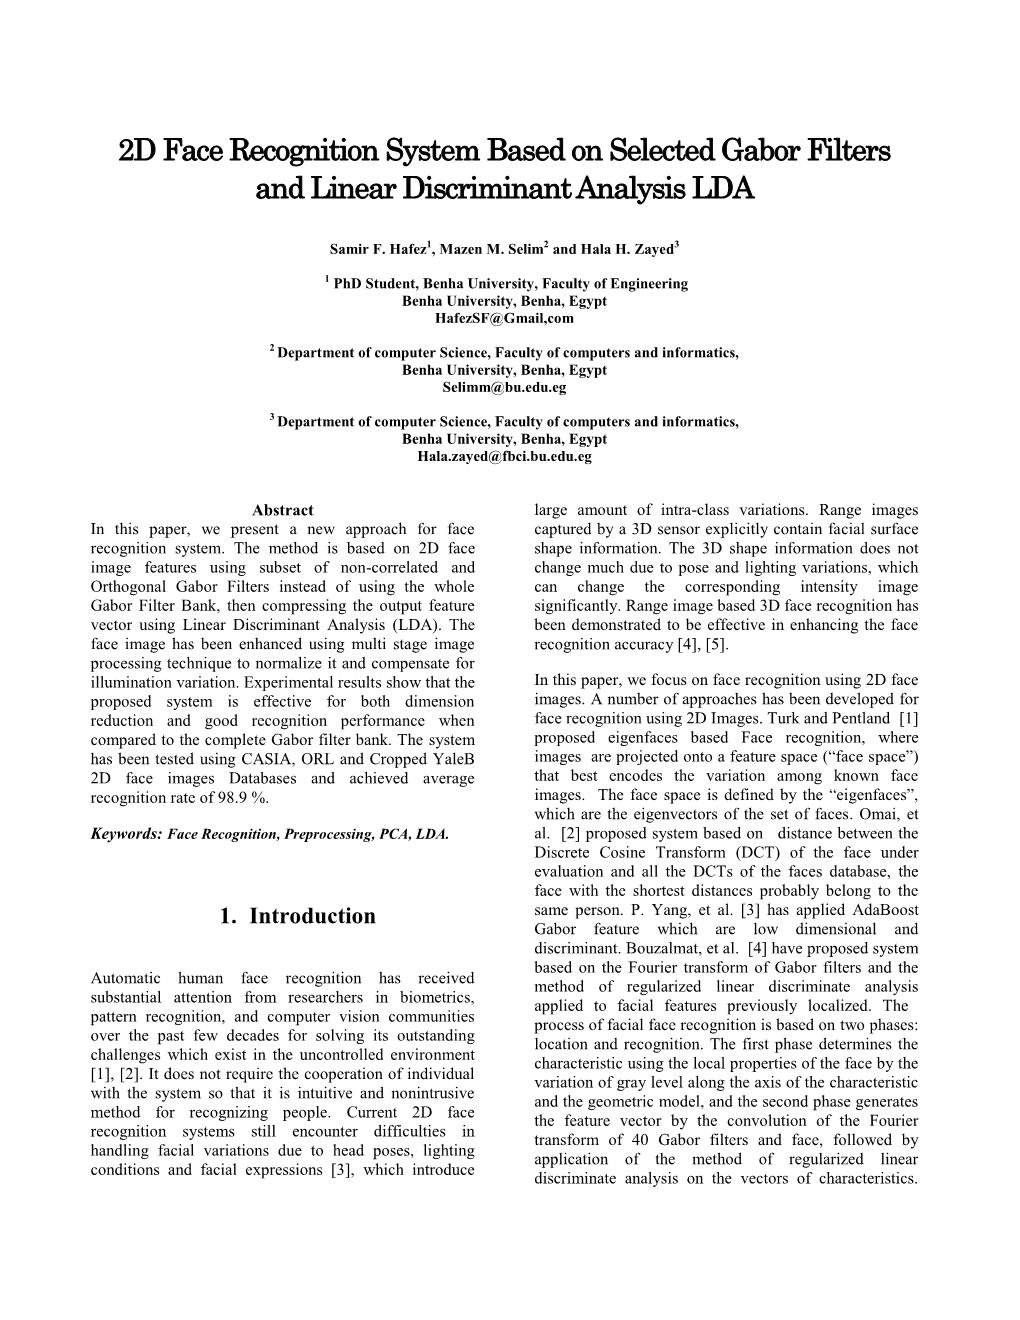 2D Face Recognition System Based on Selected Gabor Filters and Linear Discriminant Analysis LDA